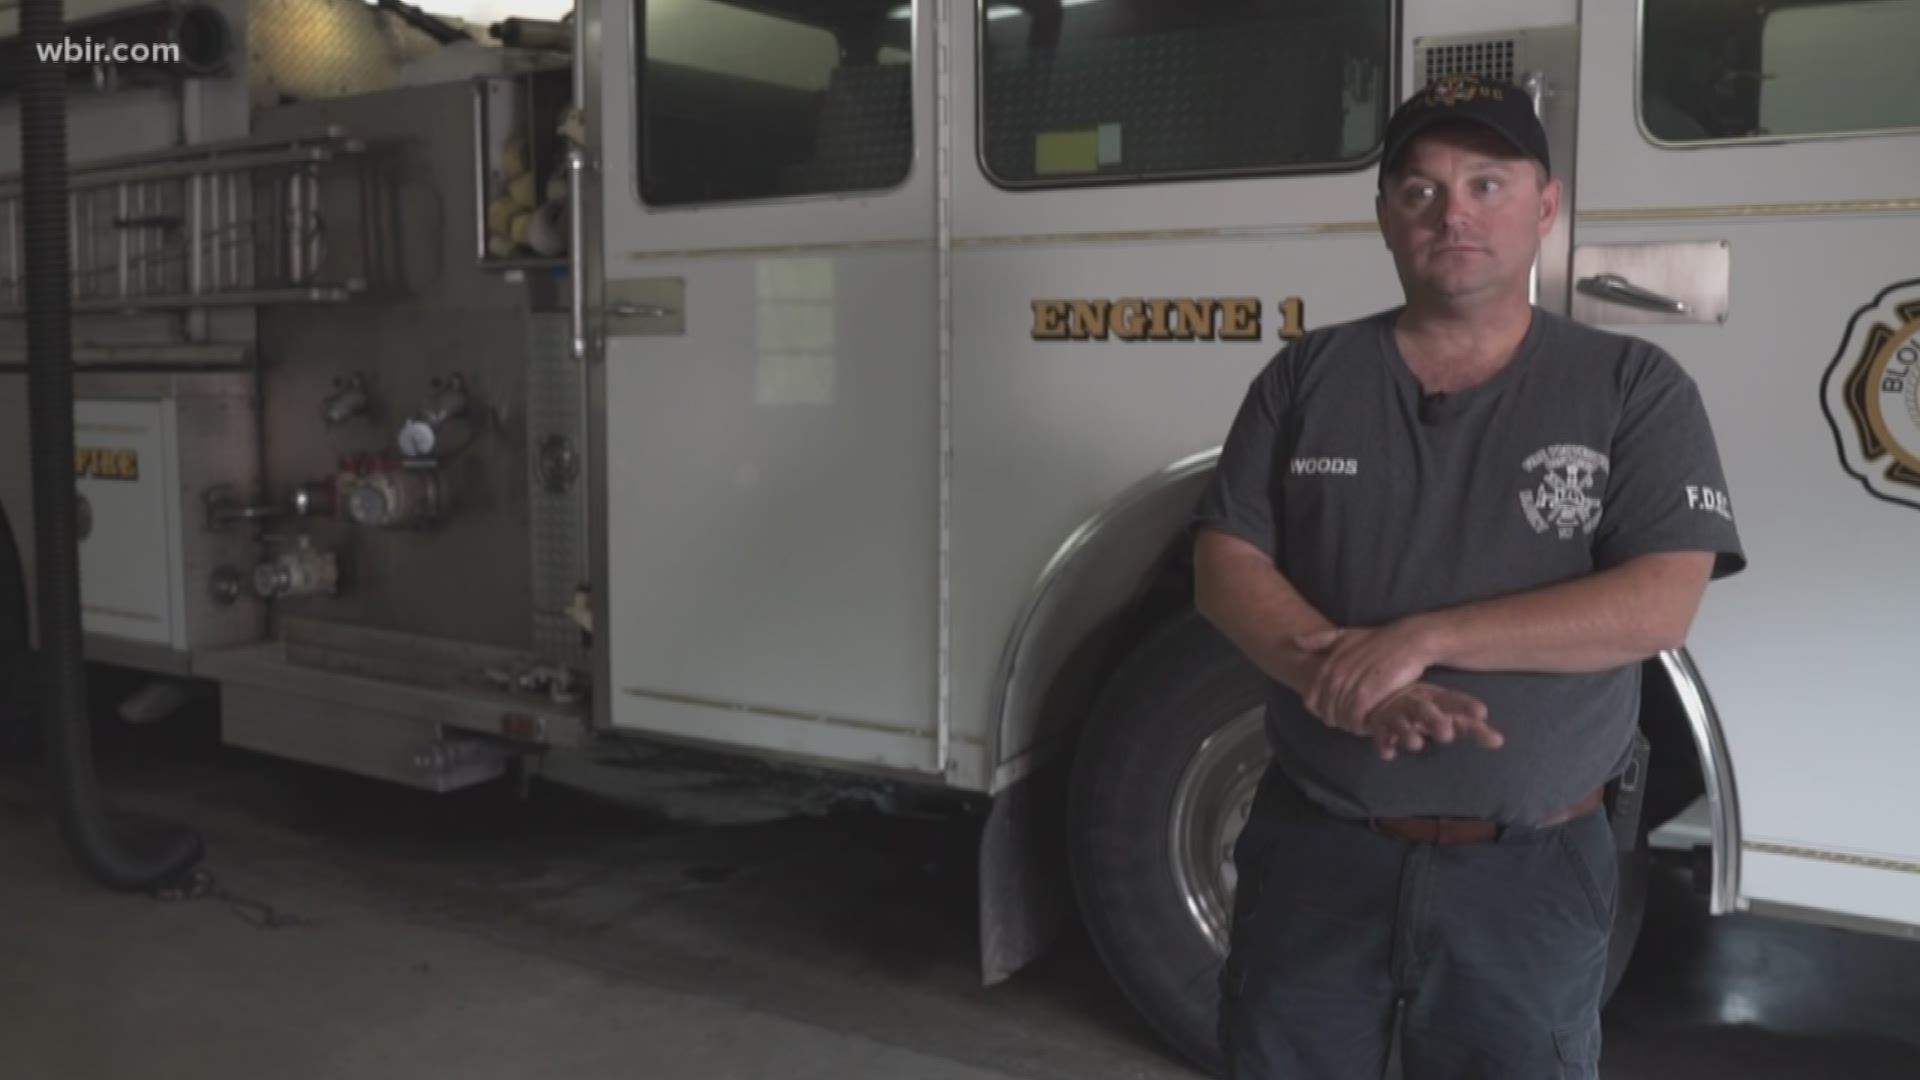 April 24, 2018: The firefighter who found a missing 6-year-old boy in Blount County says the successful rescue is the highlight of his career.